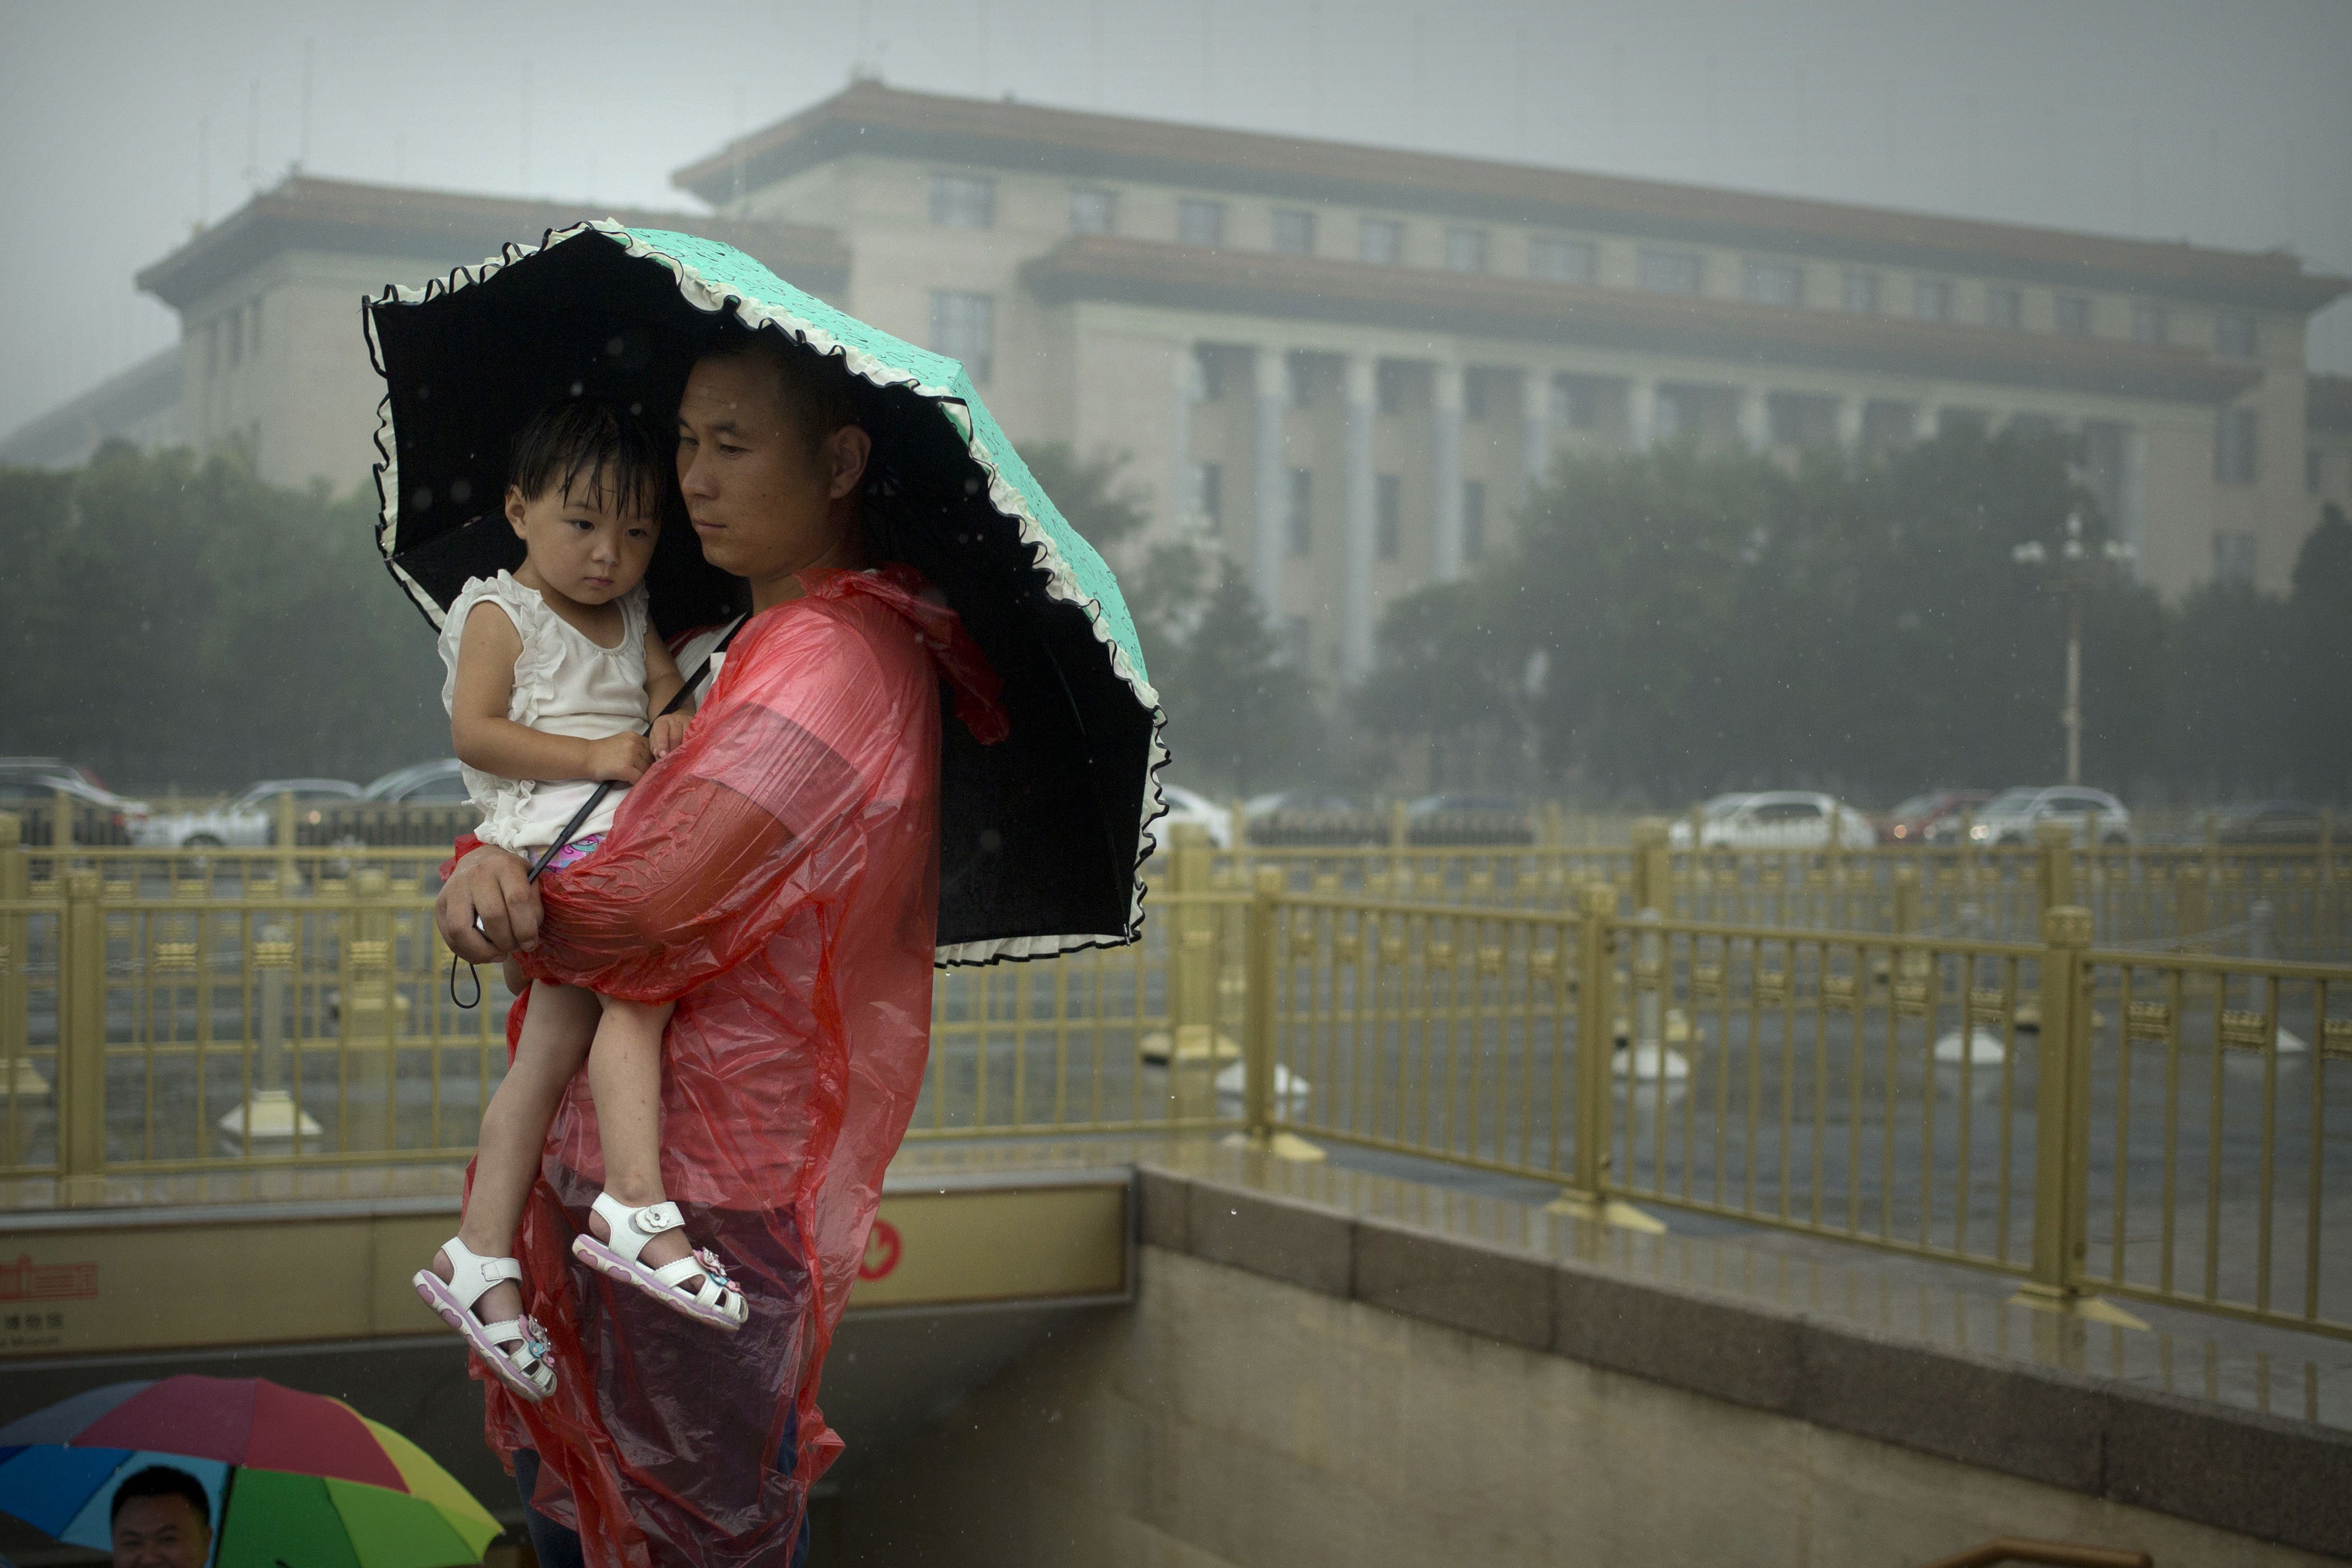 A man shelters a girl under an umbrella near the Great Hall of the People in Beijing on Thursday. Photo: AP